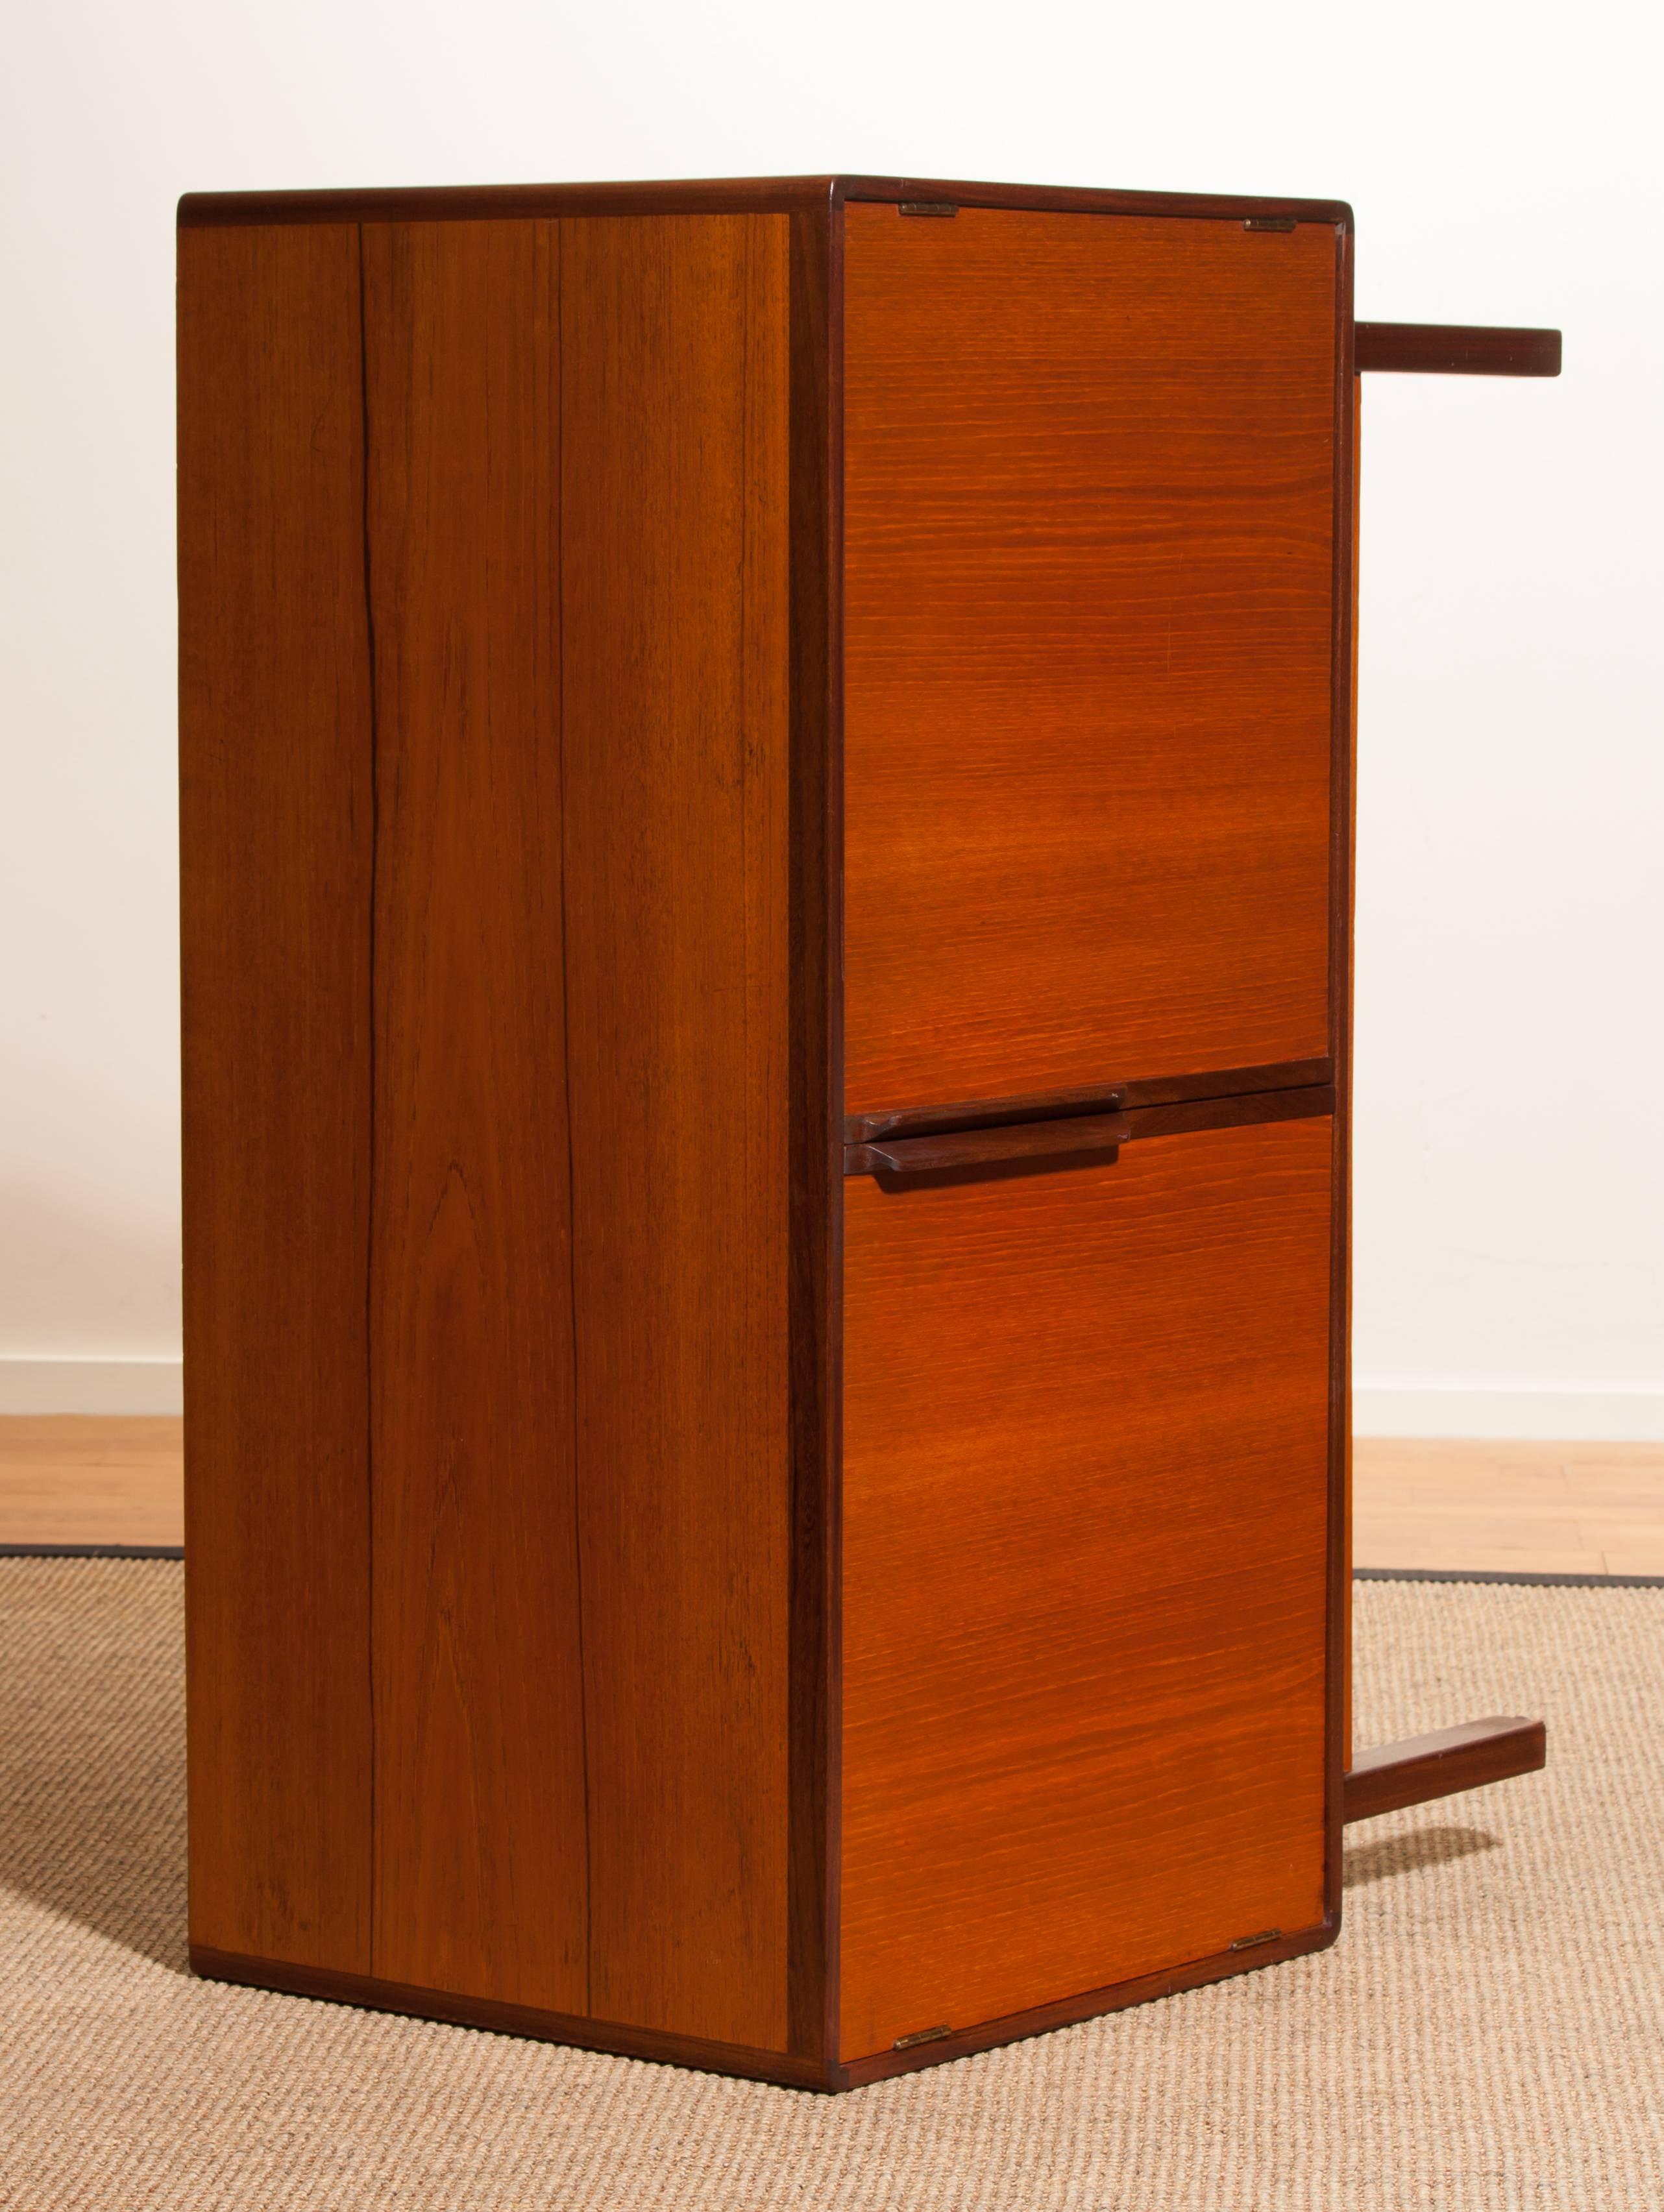 1960s, Teak and Palisander Small Sideboard Cabinet by Asko Finland 4